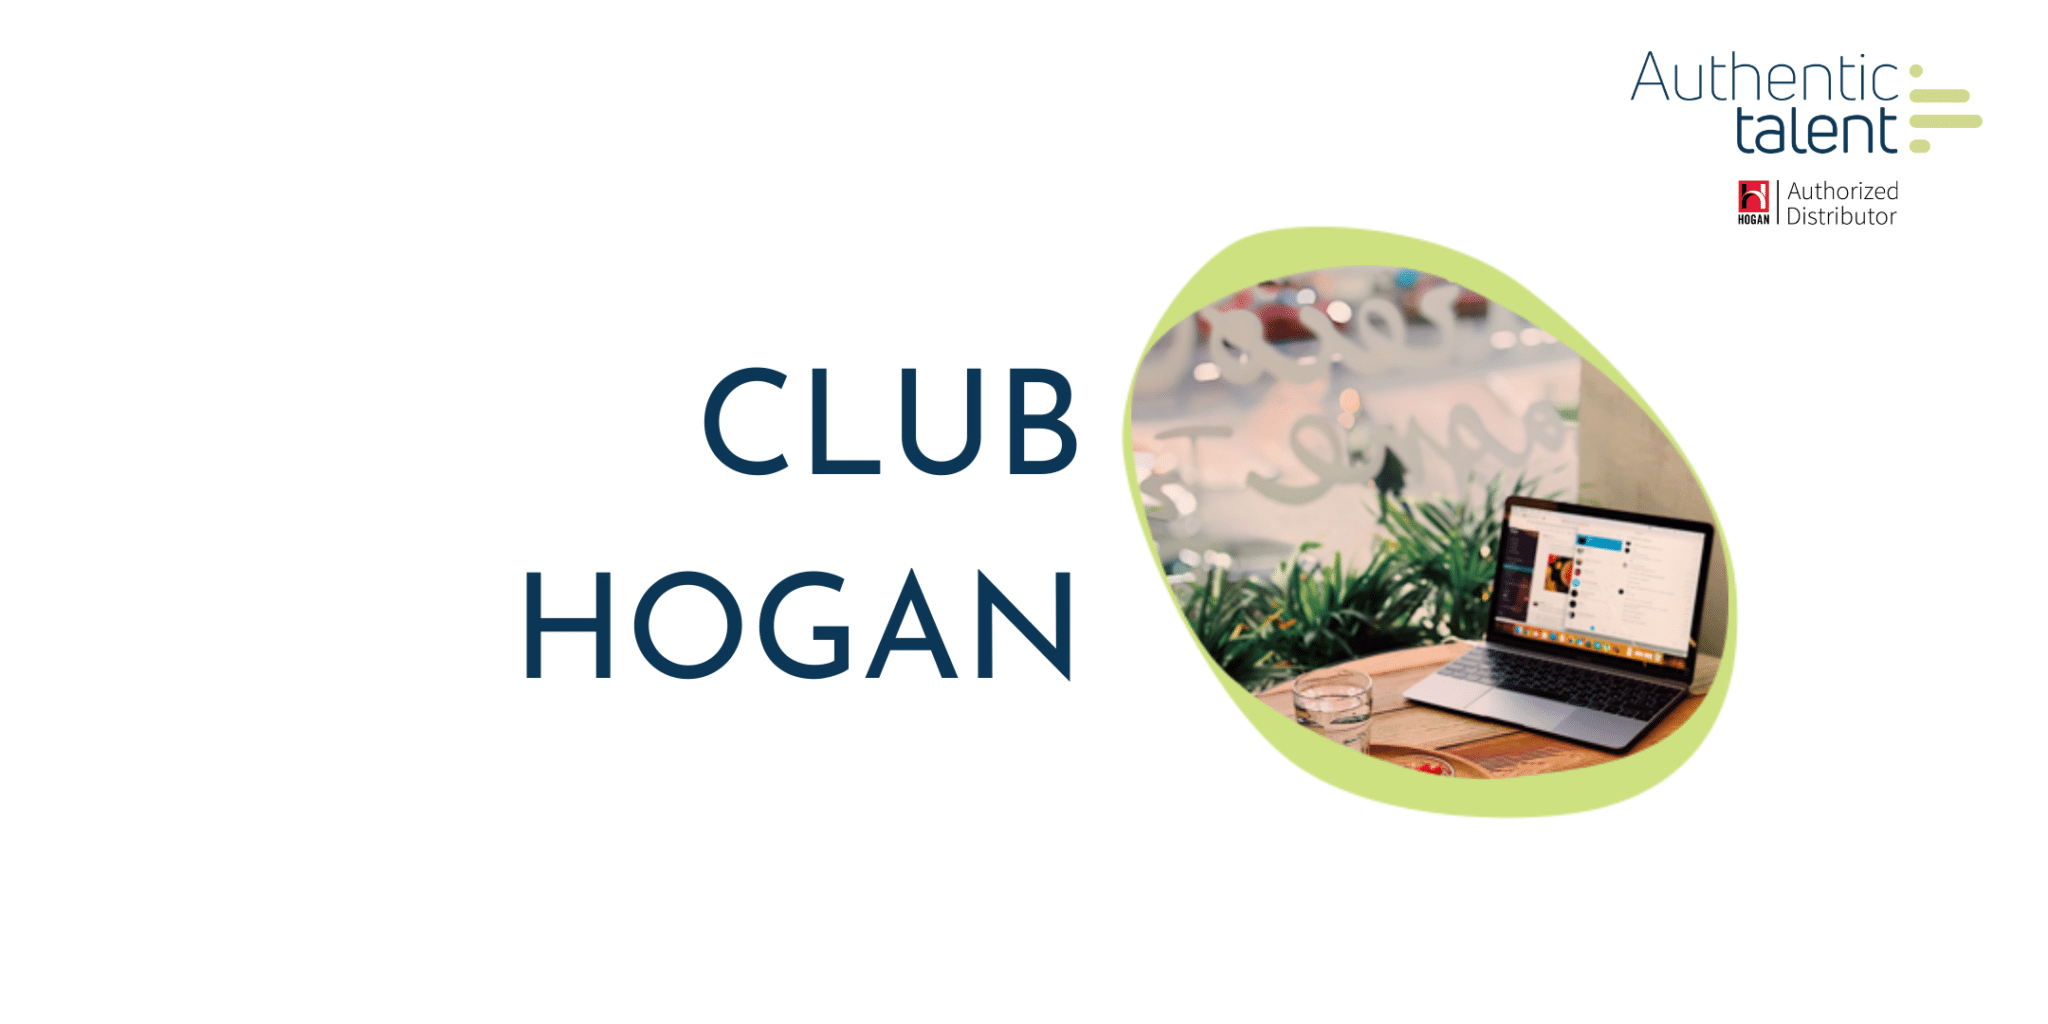 Club Hogan – Study Case Why and How to develop your leaders?